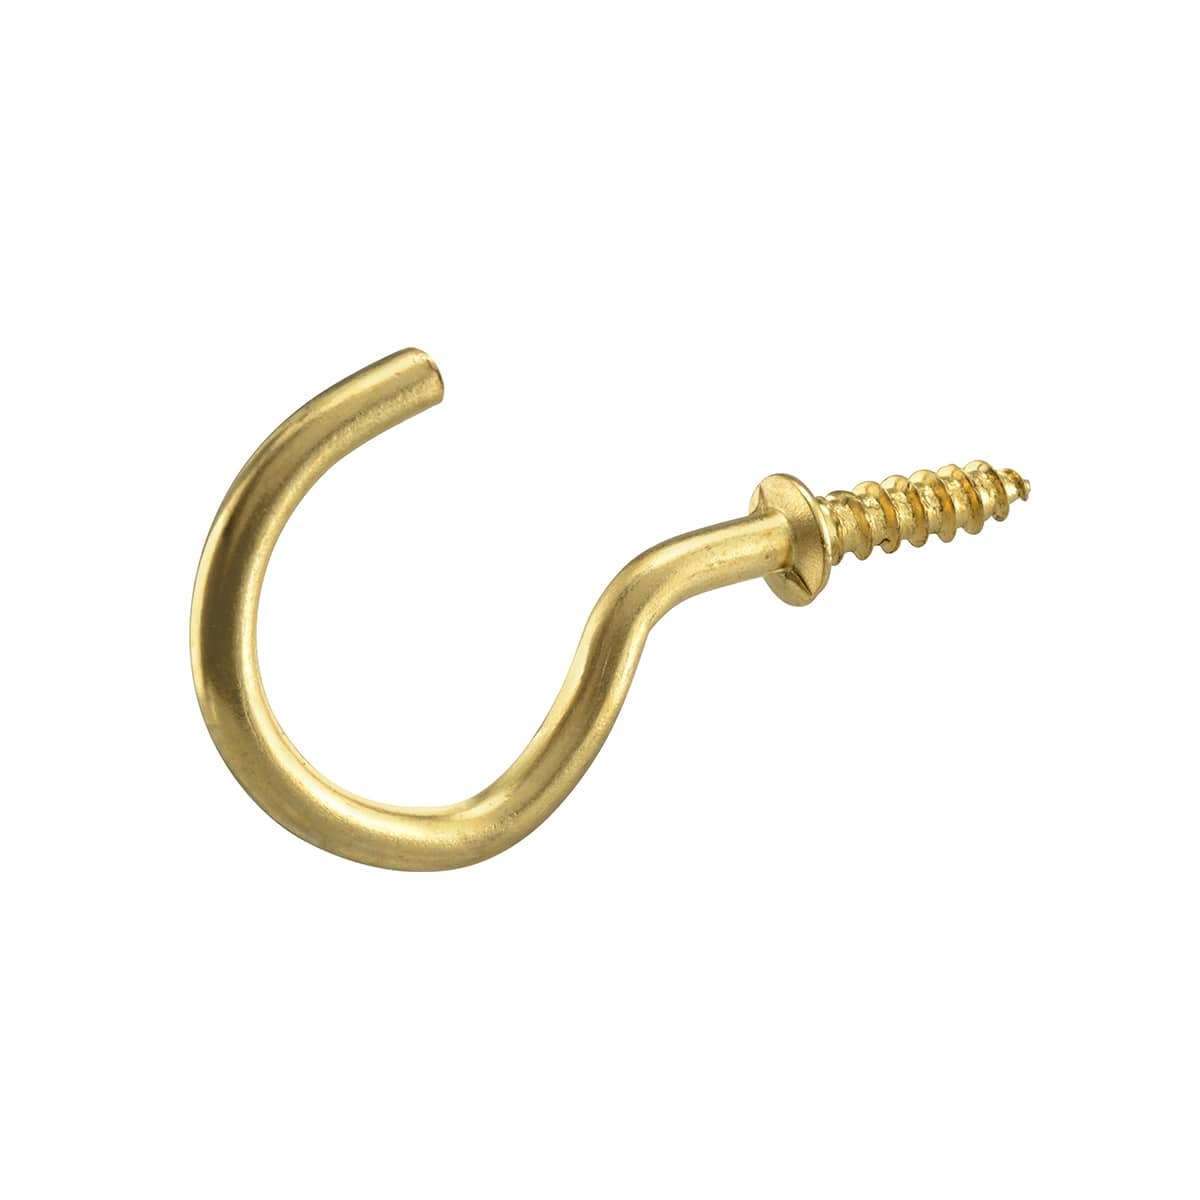 Solid Brass Cup Hooks available at Mutual Screw & Fasteners Supply